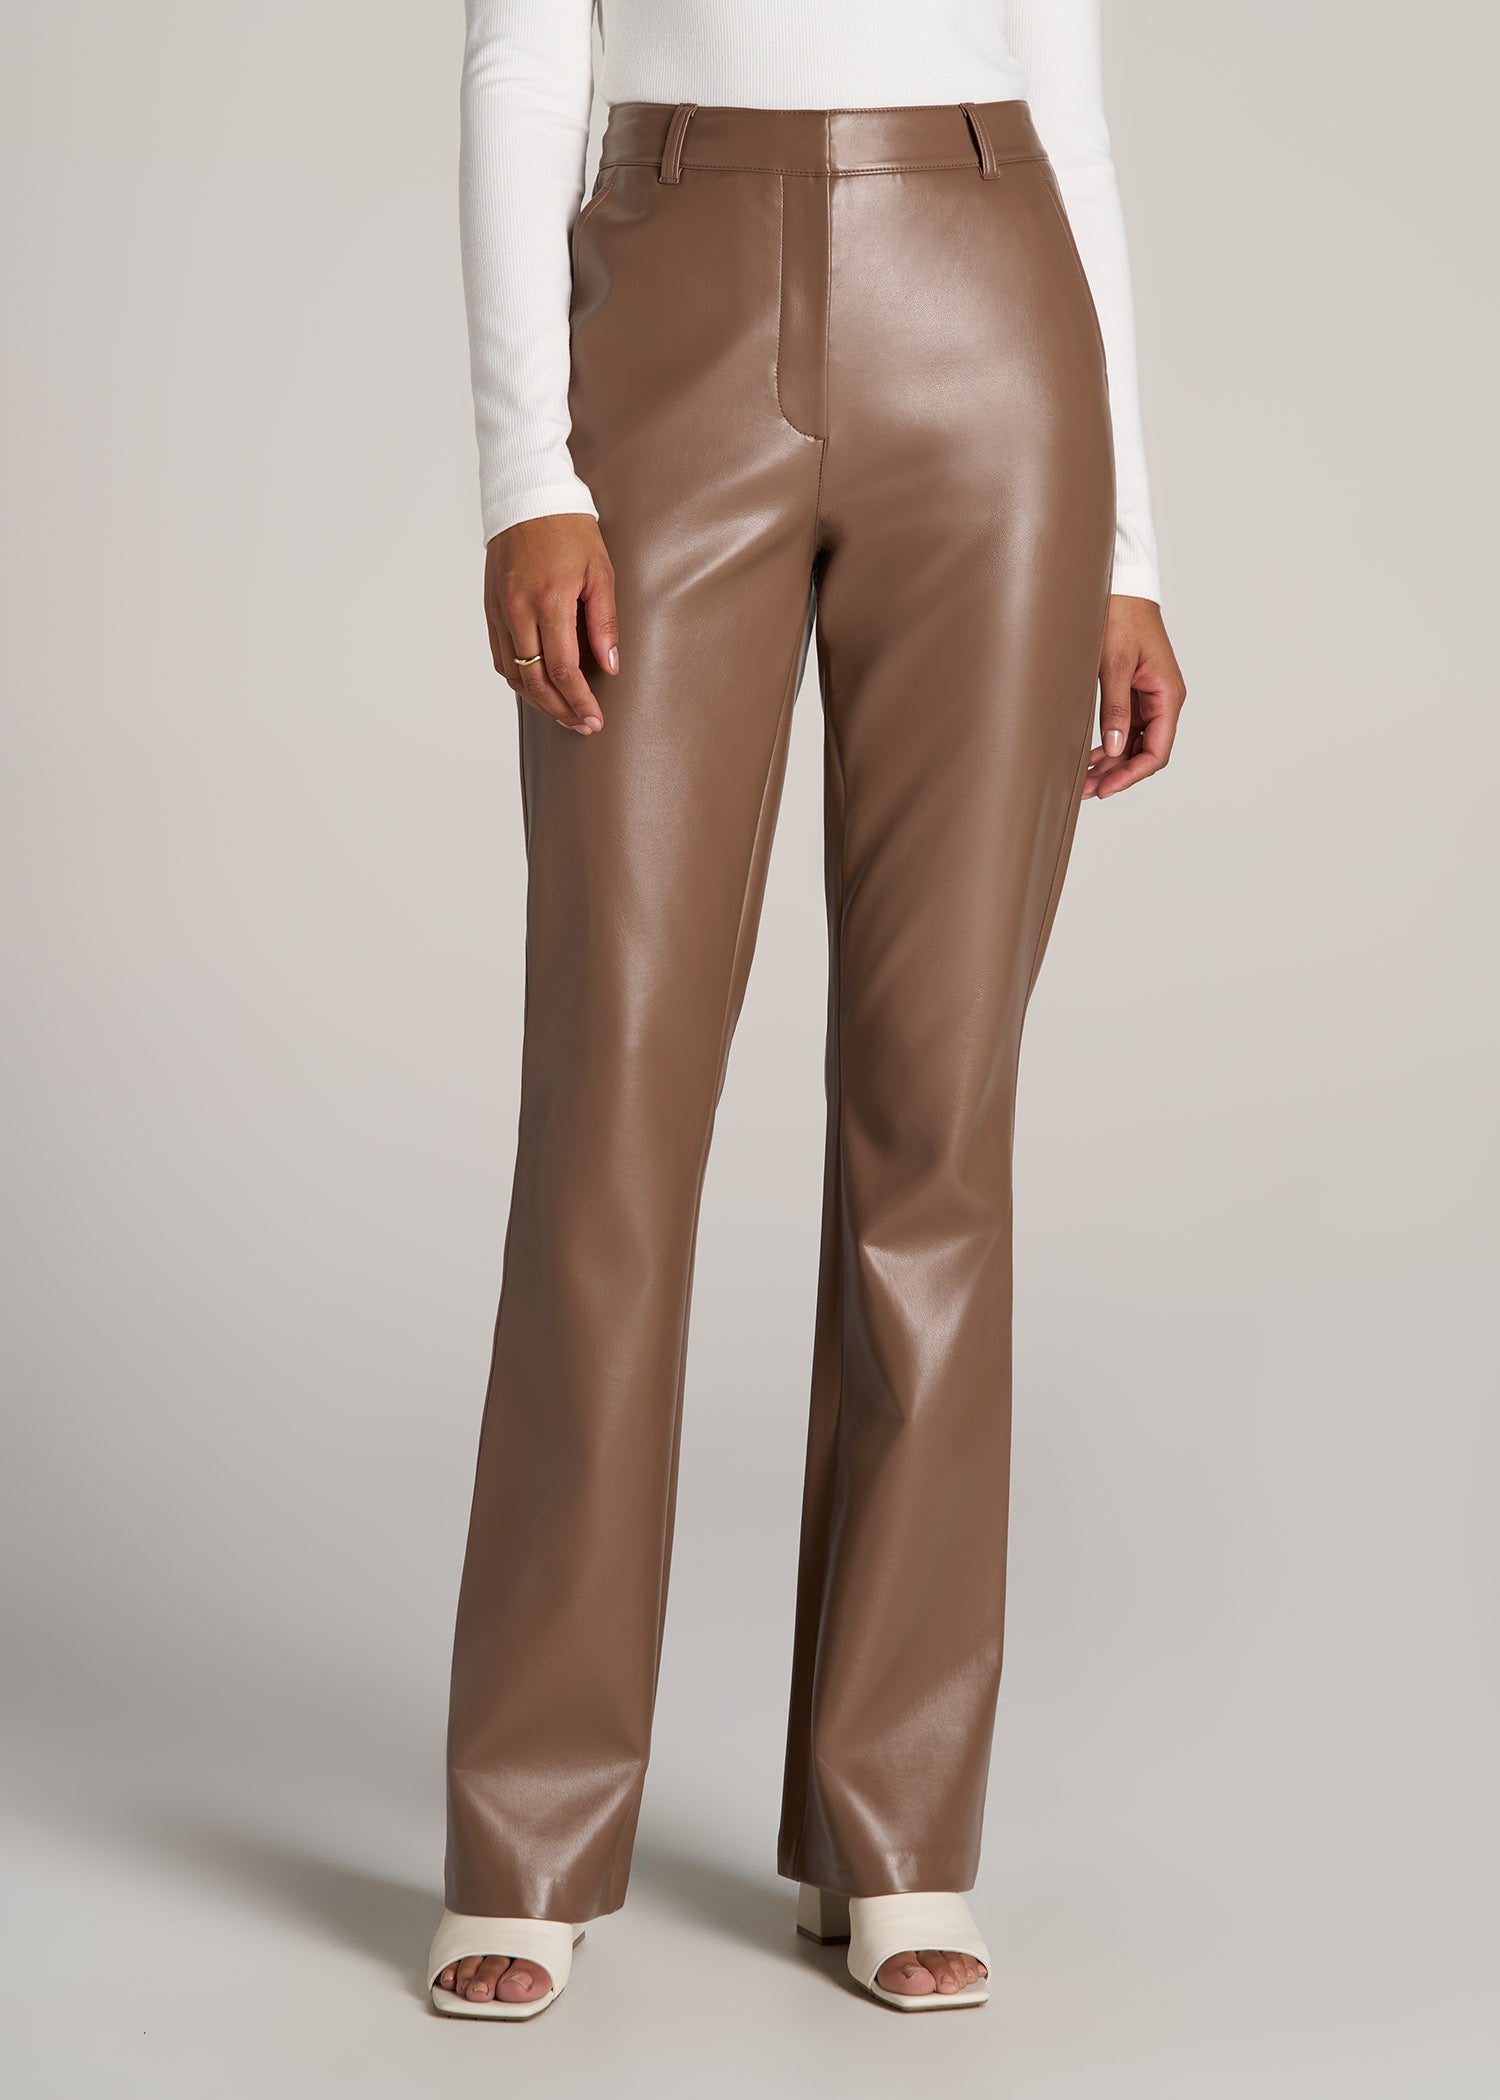 Women's Leather Trousers, Explore our New Arrivals